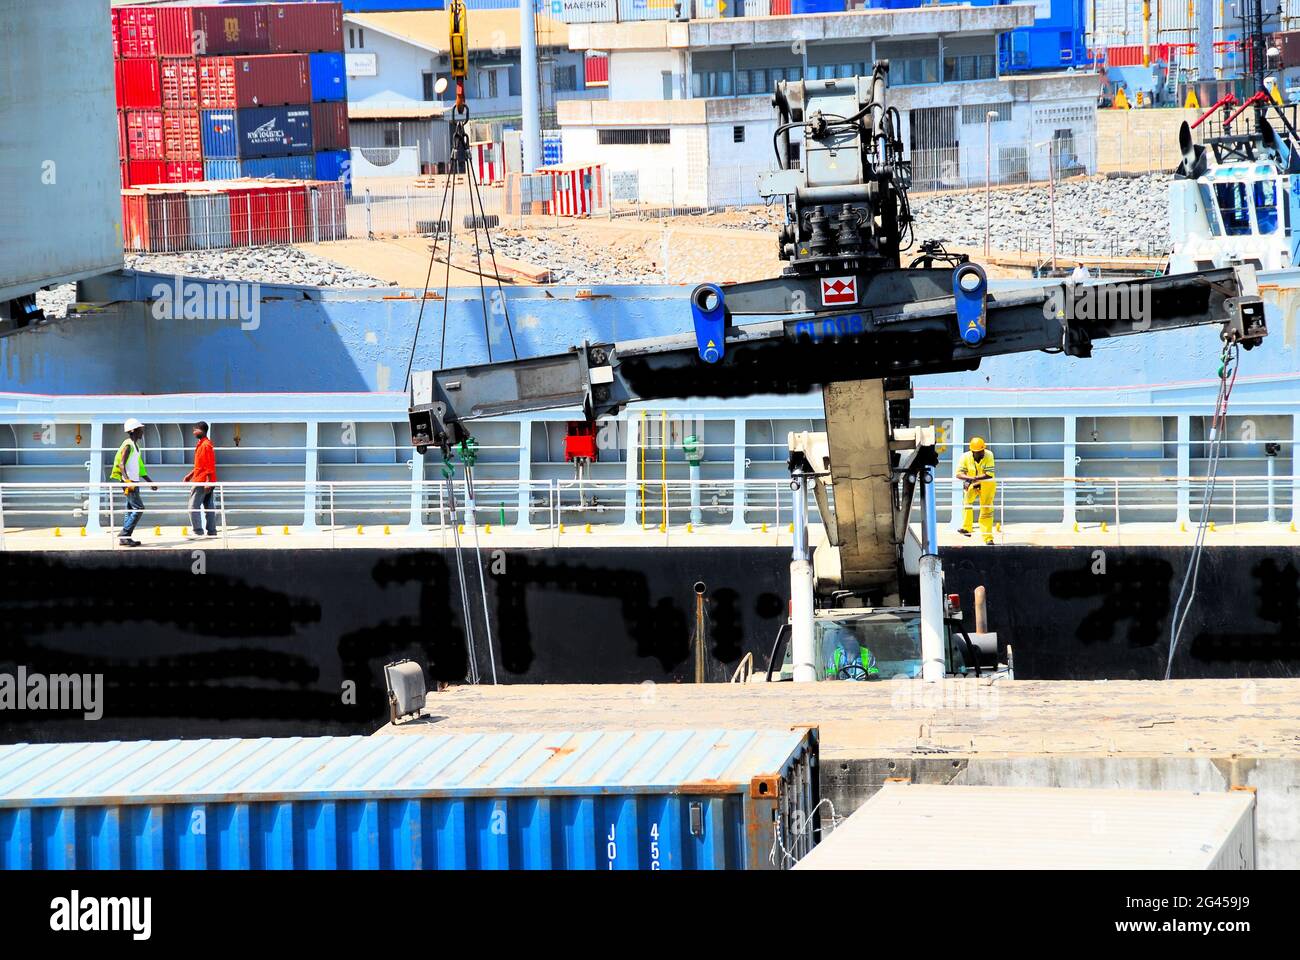 A photo of part of the tropical Port in Lomé, Togo, West Africa, with containers,  a crane. and shipyard workers. Stock Photo